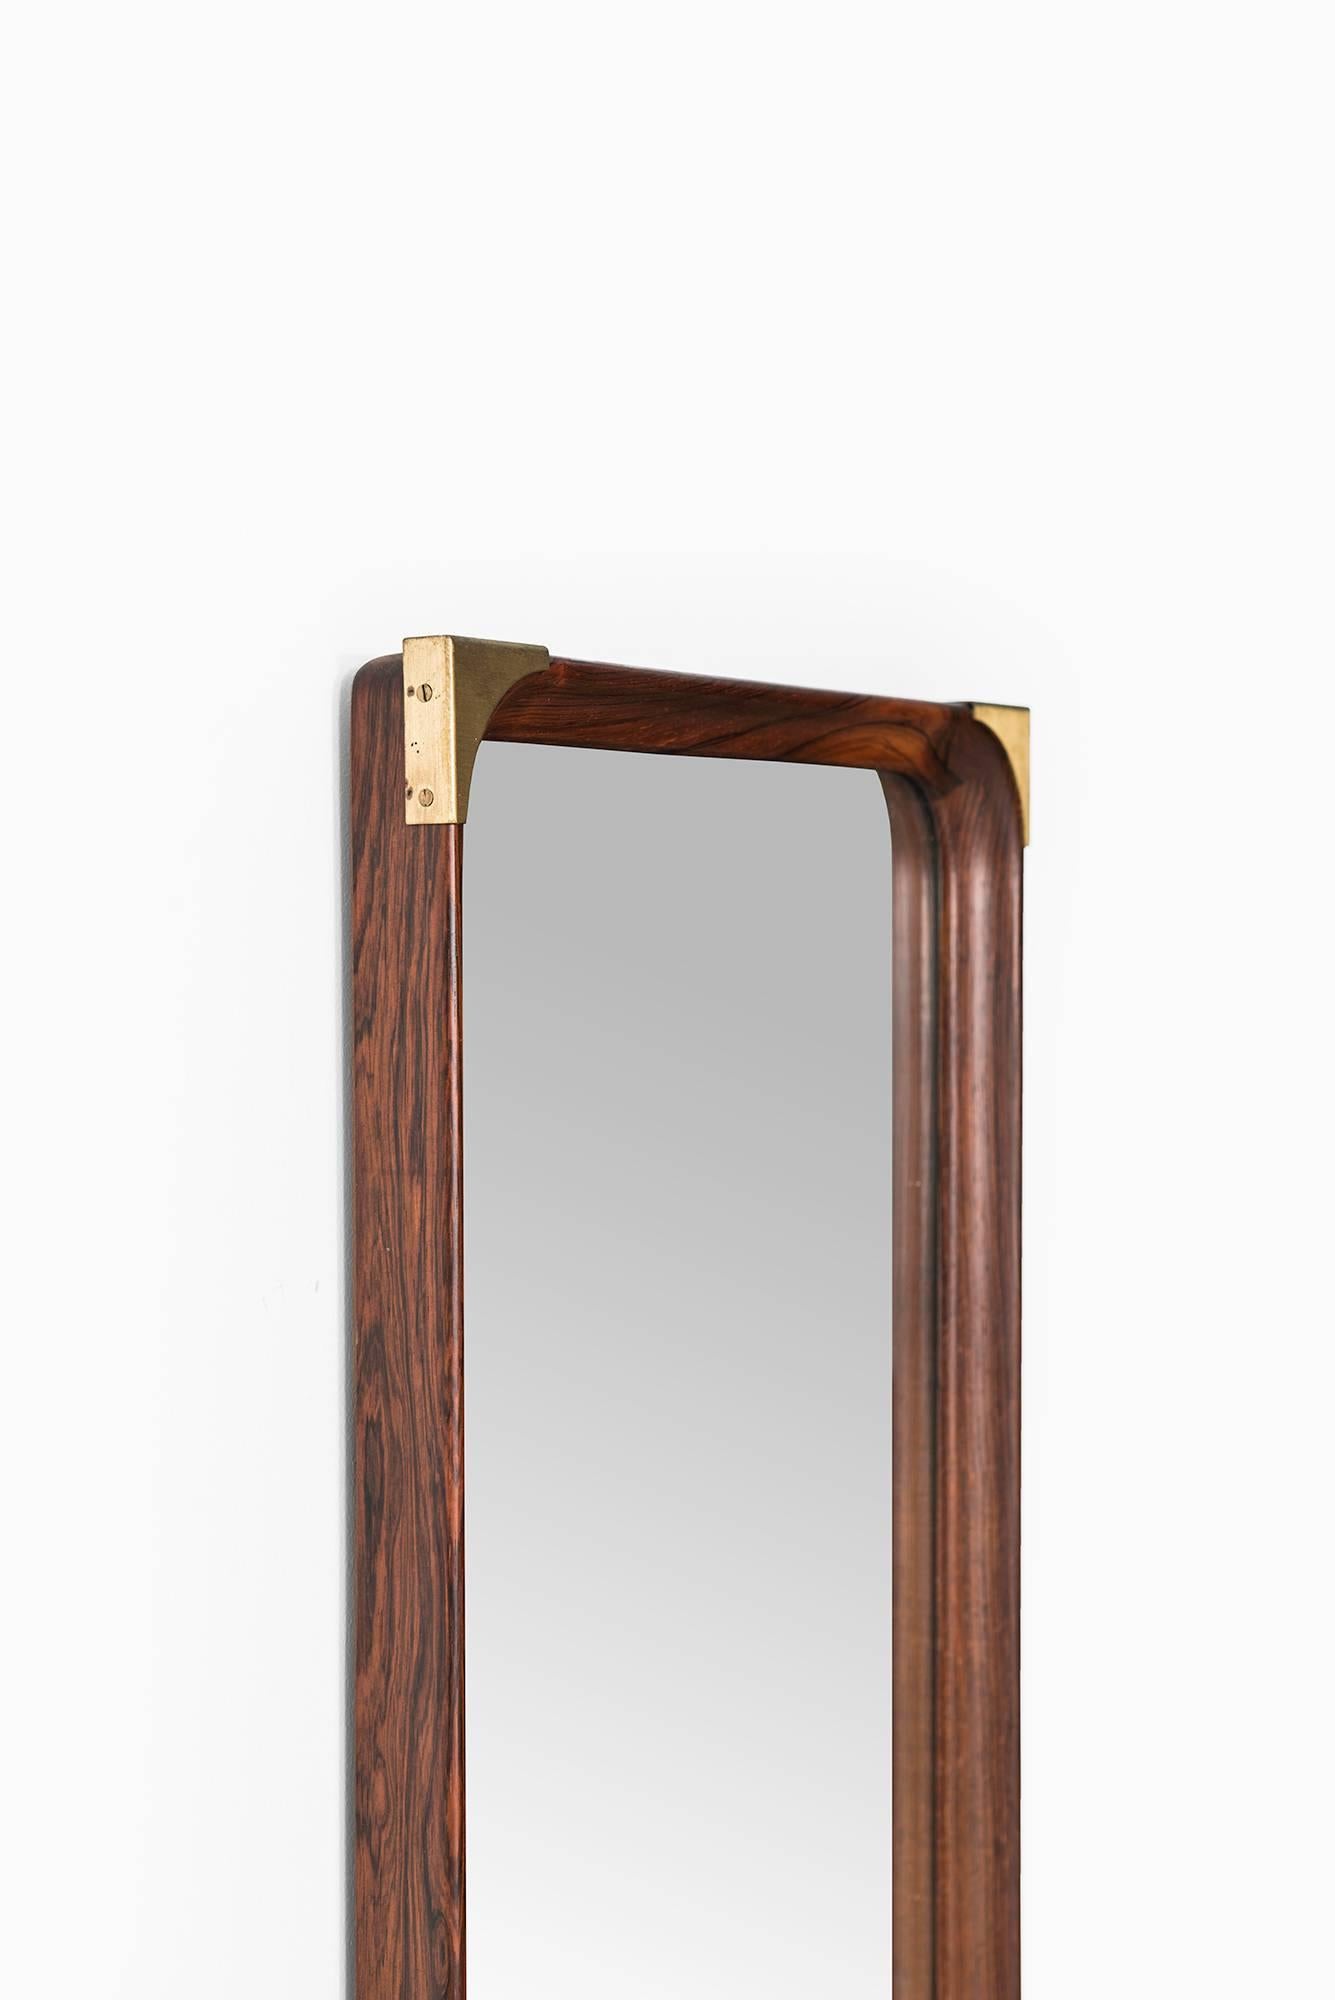 Swedish Rosewood Mirror with Brass Details Produced in Sweden